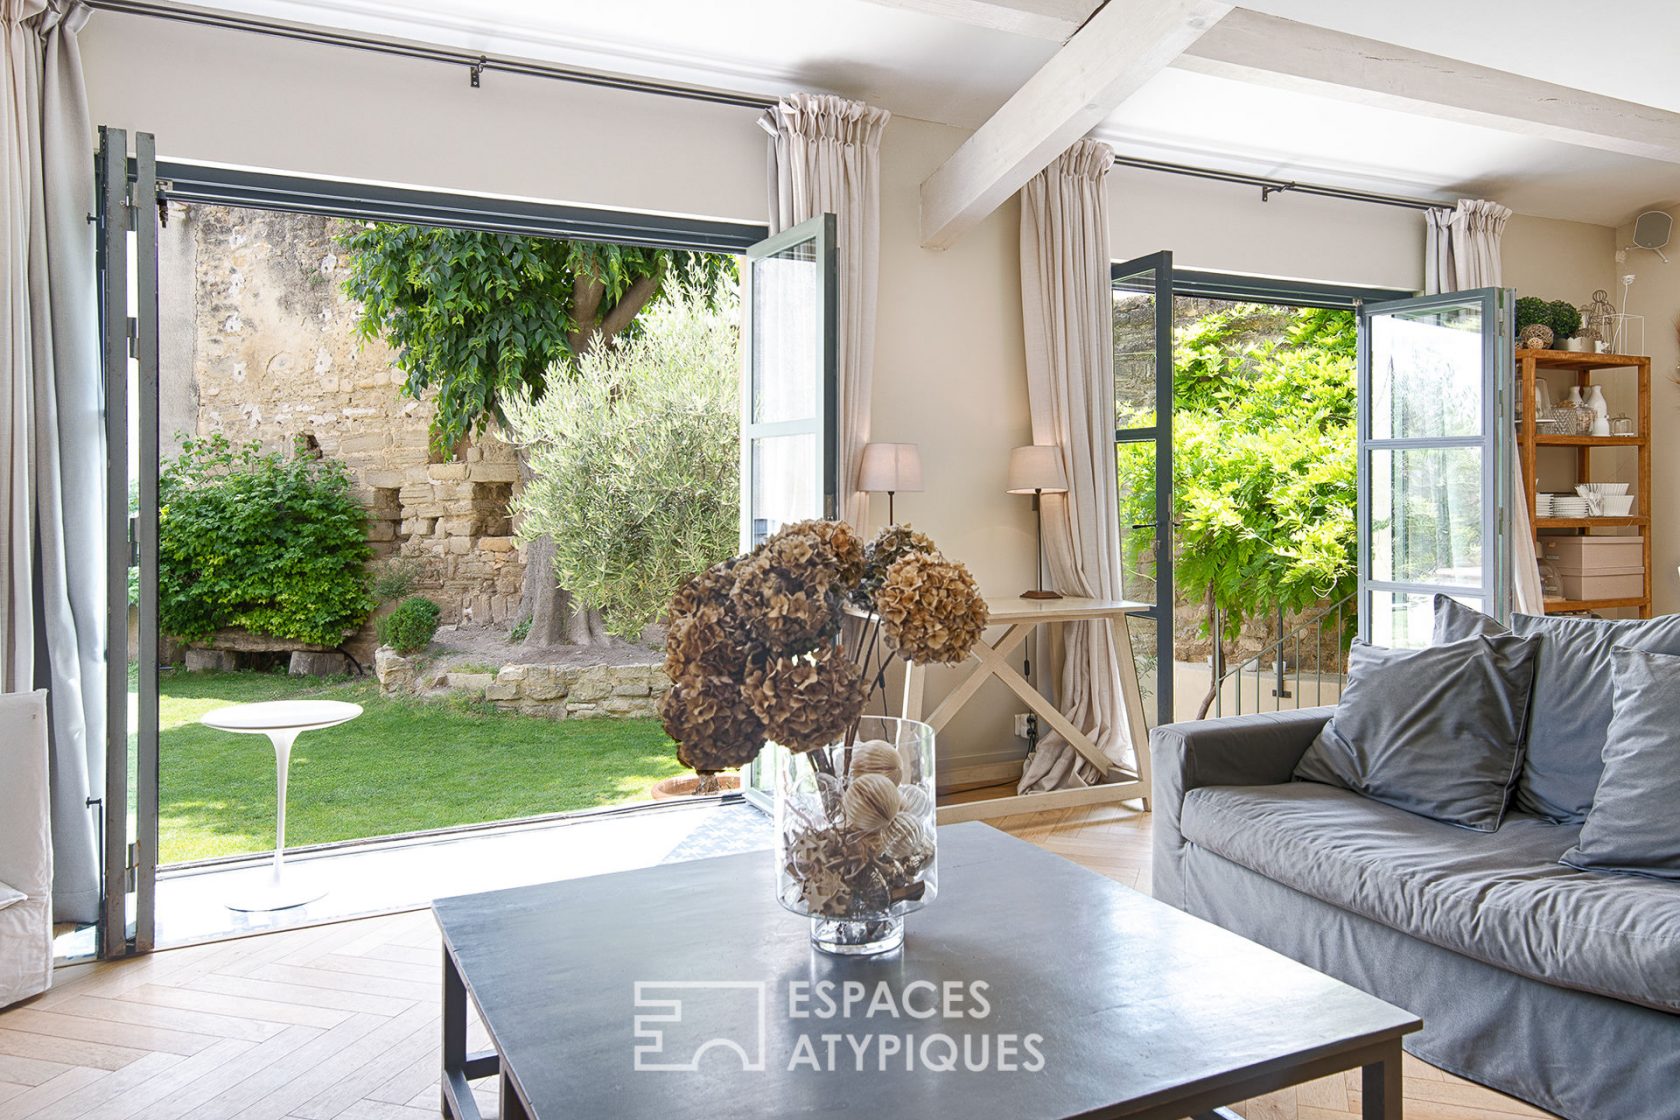 Haven of peace nestled in the heart of a Provencal village